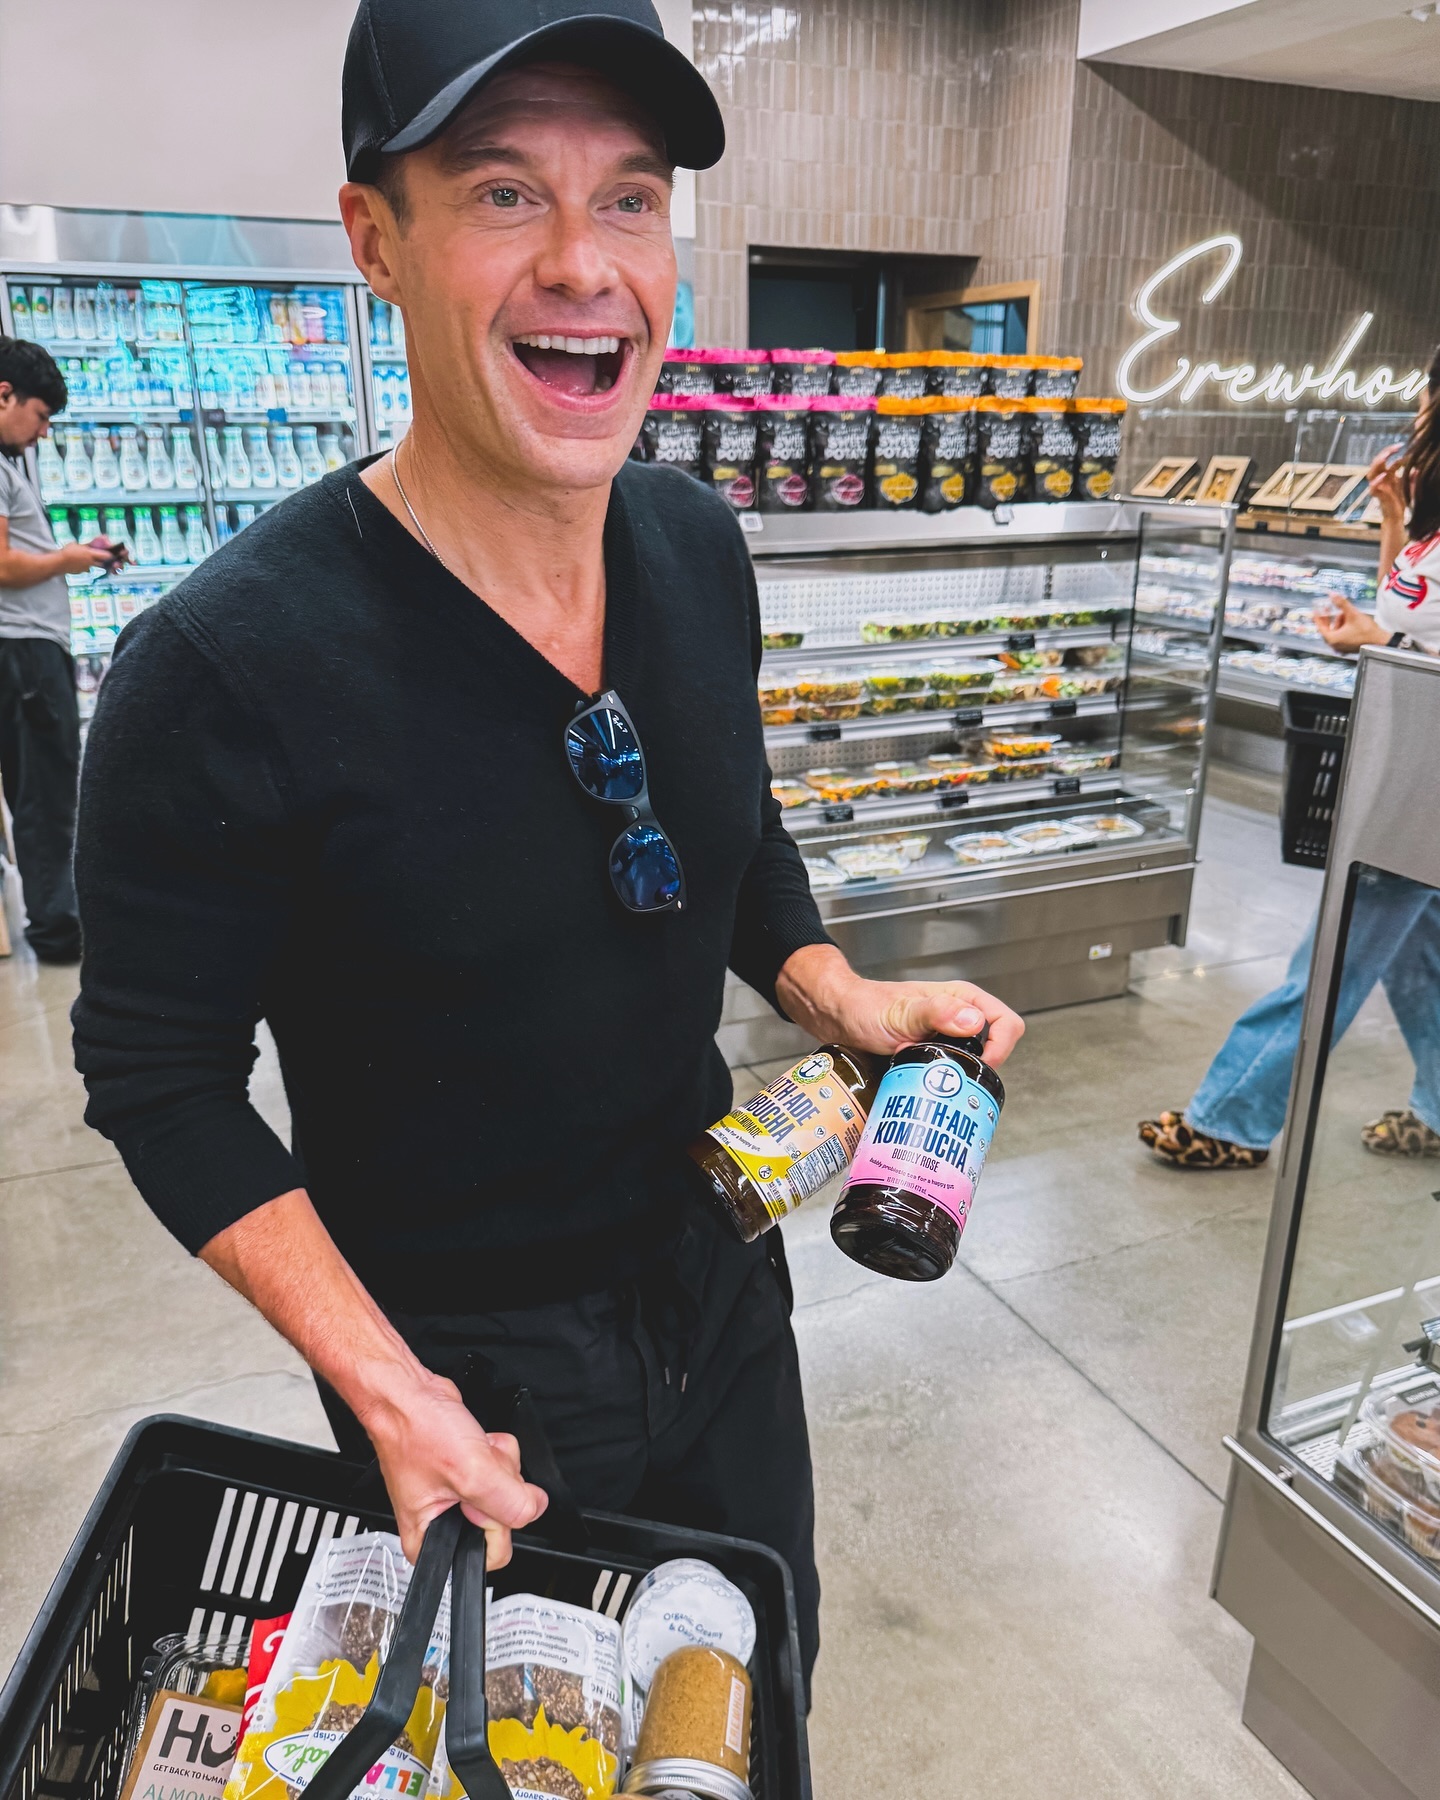 Ryan was all smiles while carrying two bottles of Health-Ade Kombucha tea